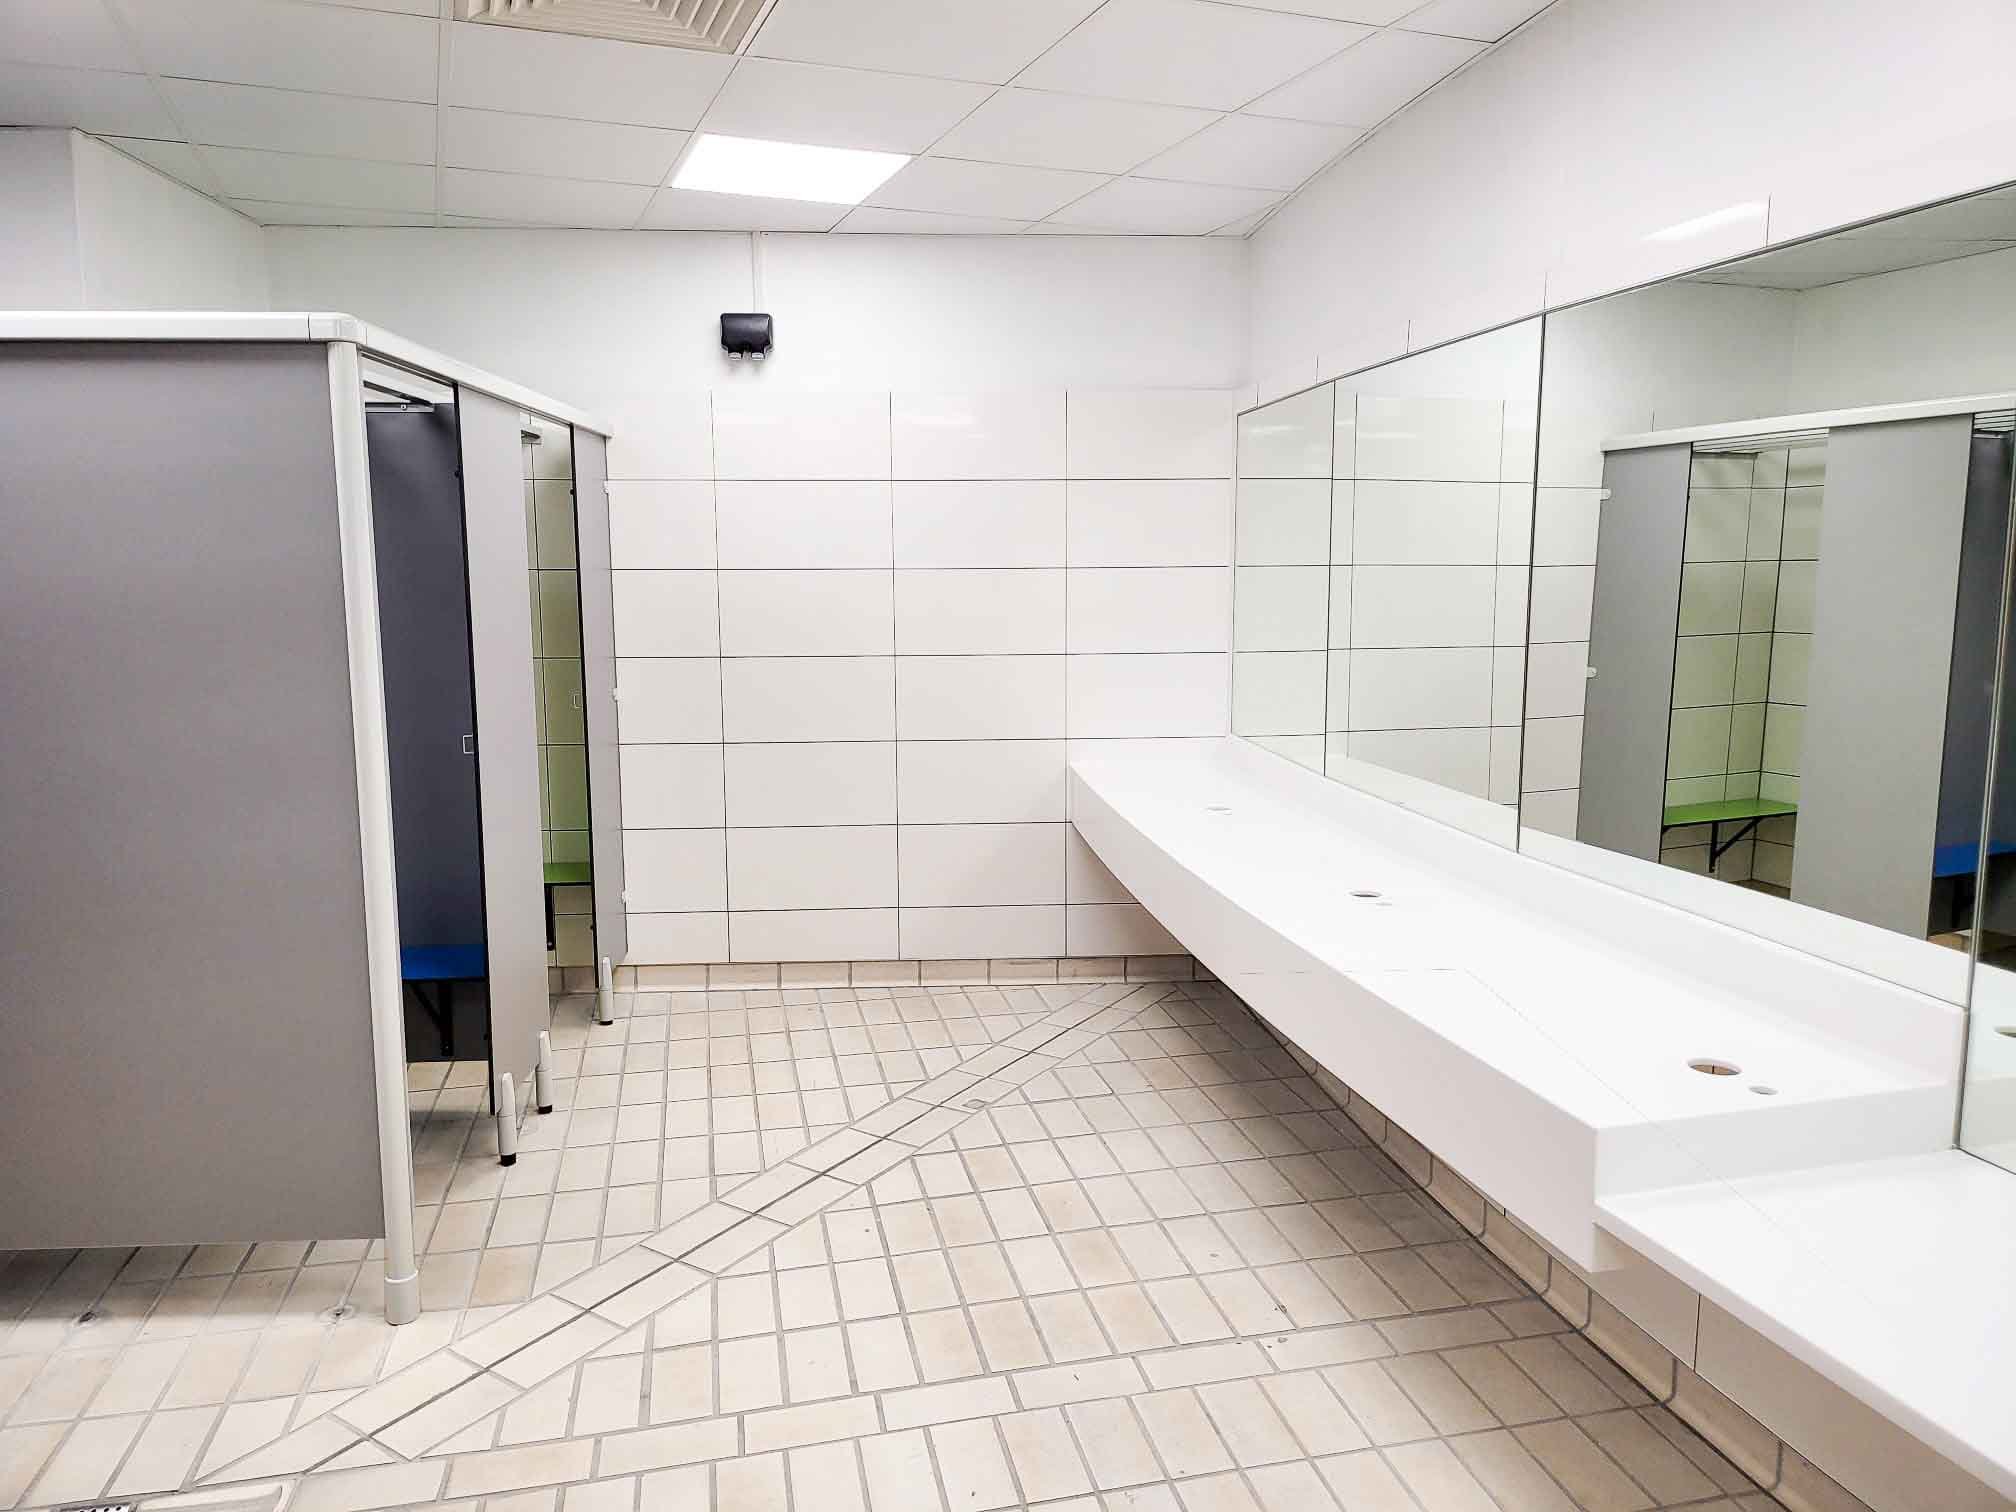 changing room at herons leisure centre with changing cubicles and a curved corian vanity area with mirrors.jpg